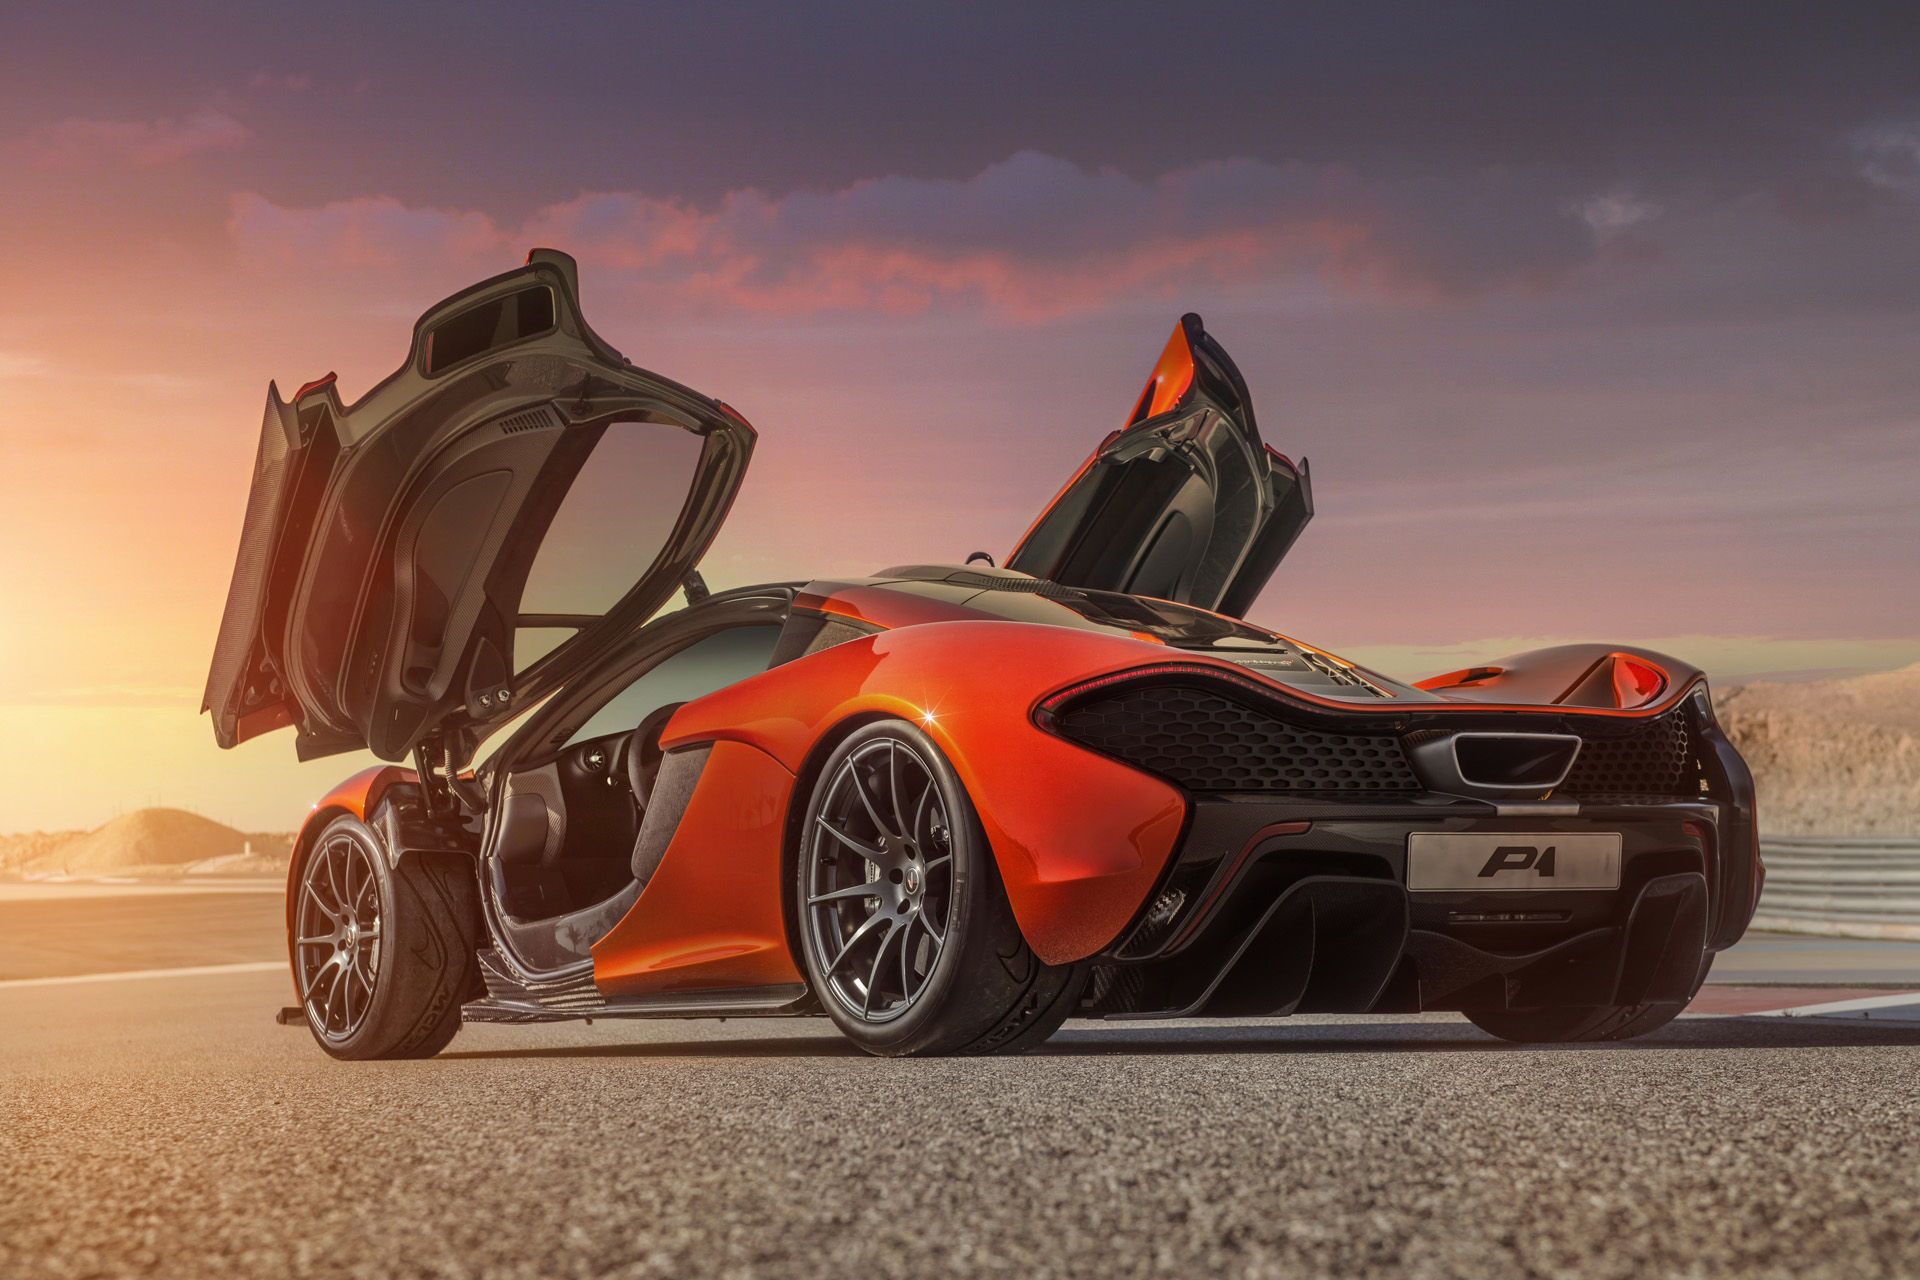 New Mclaren P1 High Res Image Released Forcegt